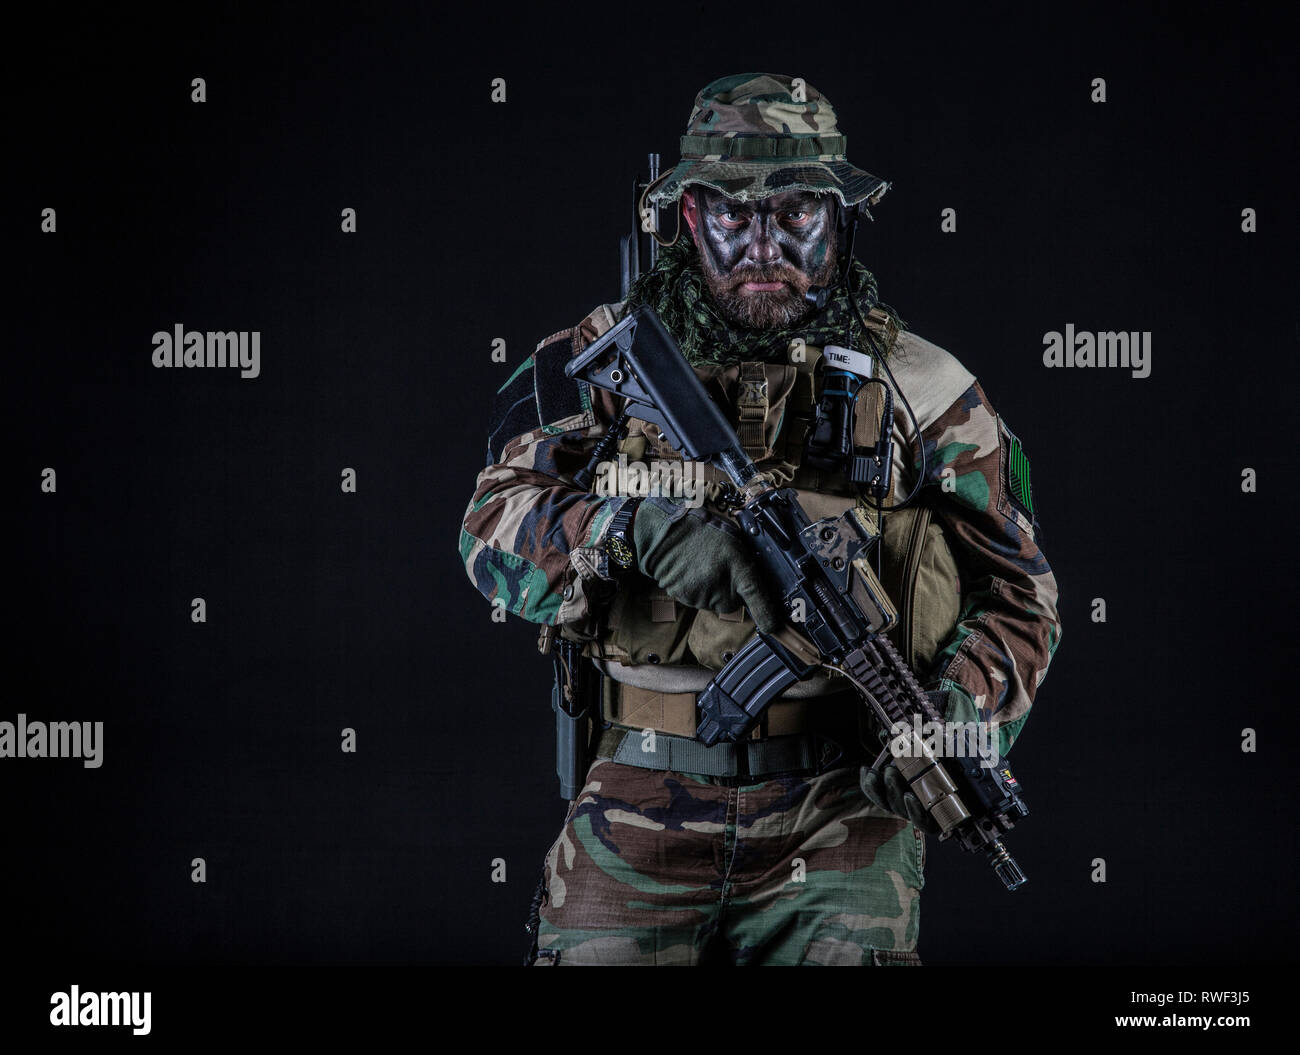 A U.S. special forces soldier in camouflage uniform holding weapon. Stock Photo